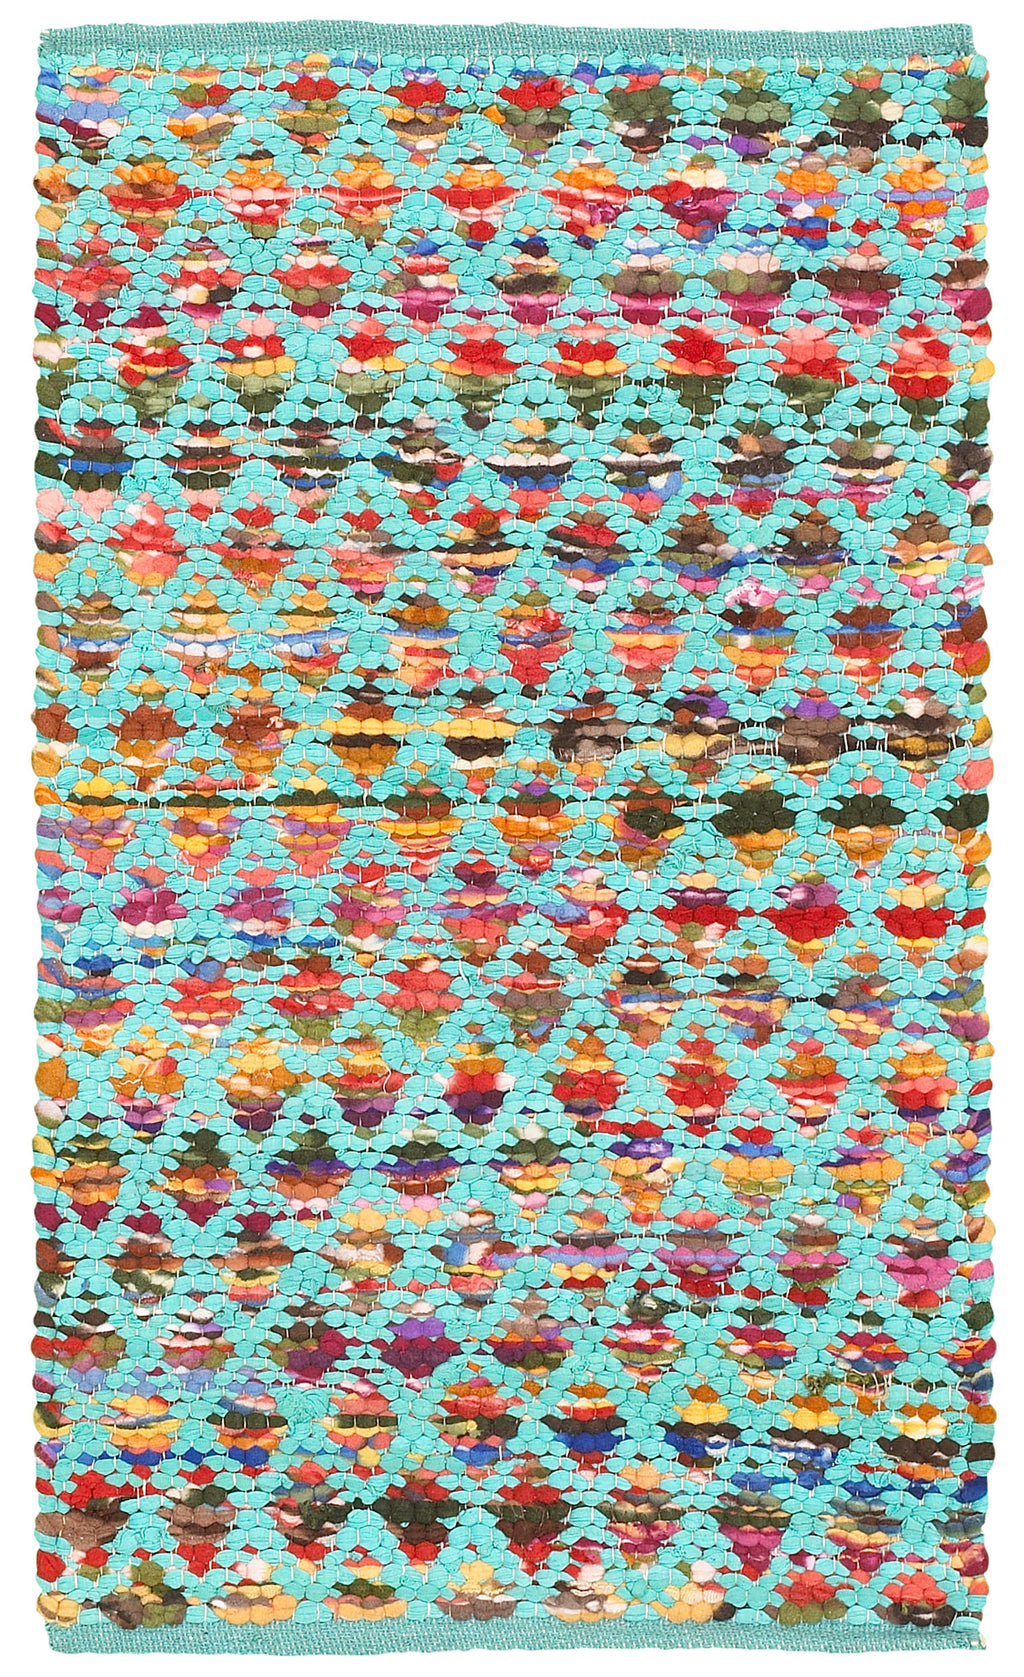 LR Resources Accent 05013 Turquoise Hand Woven Area Rug 1'9'' X 2'10''